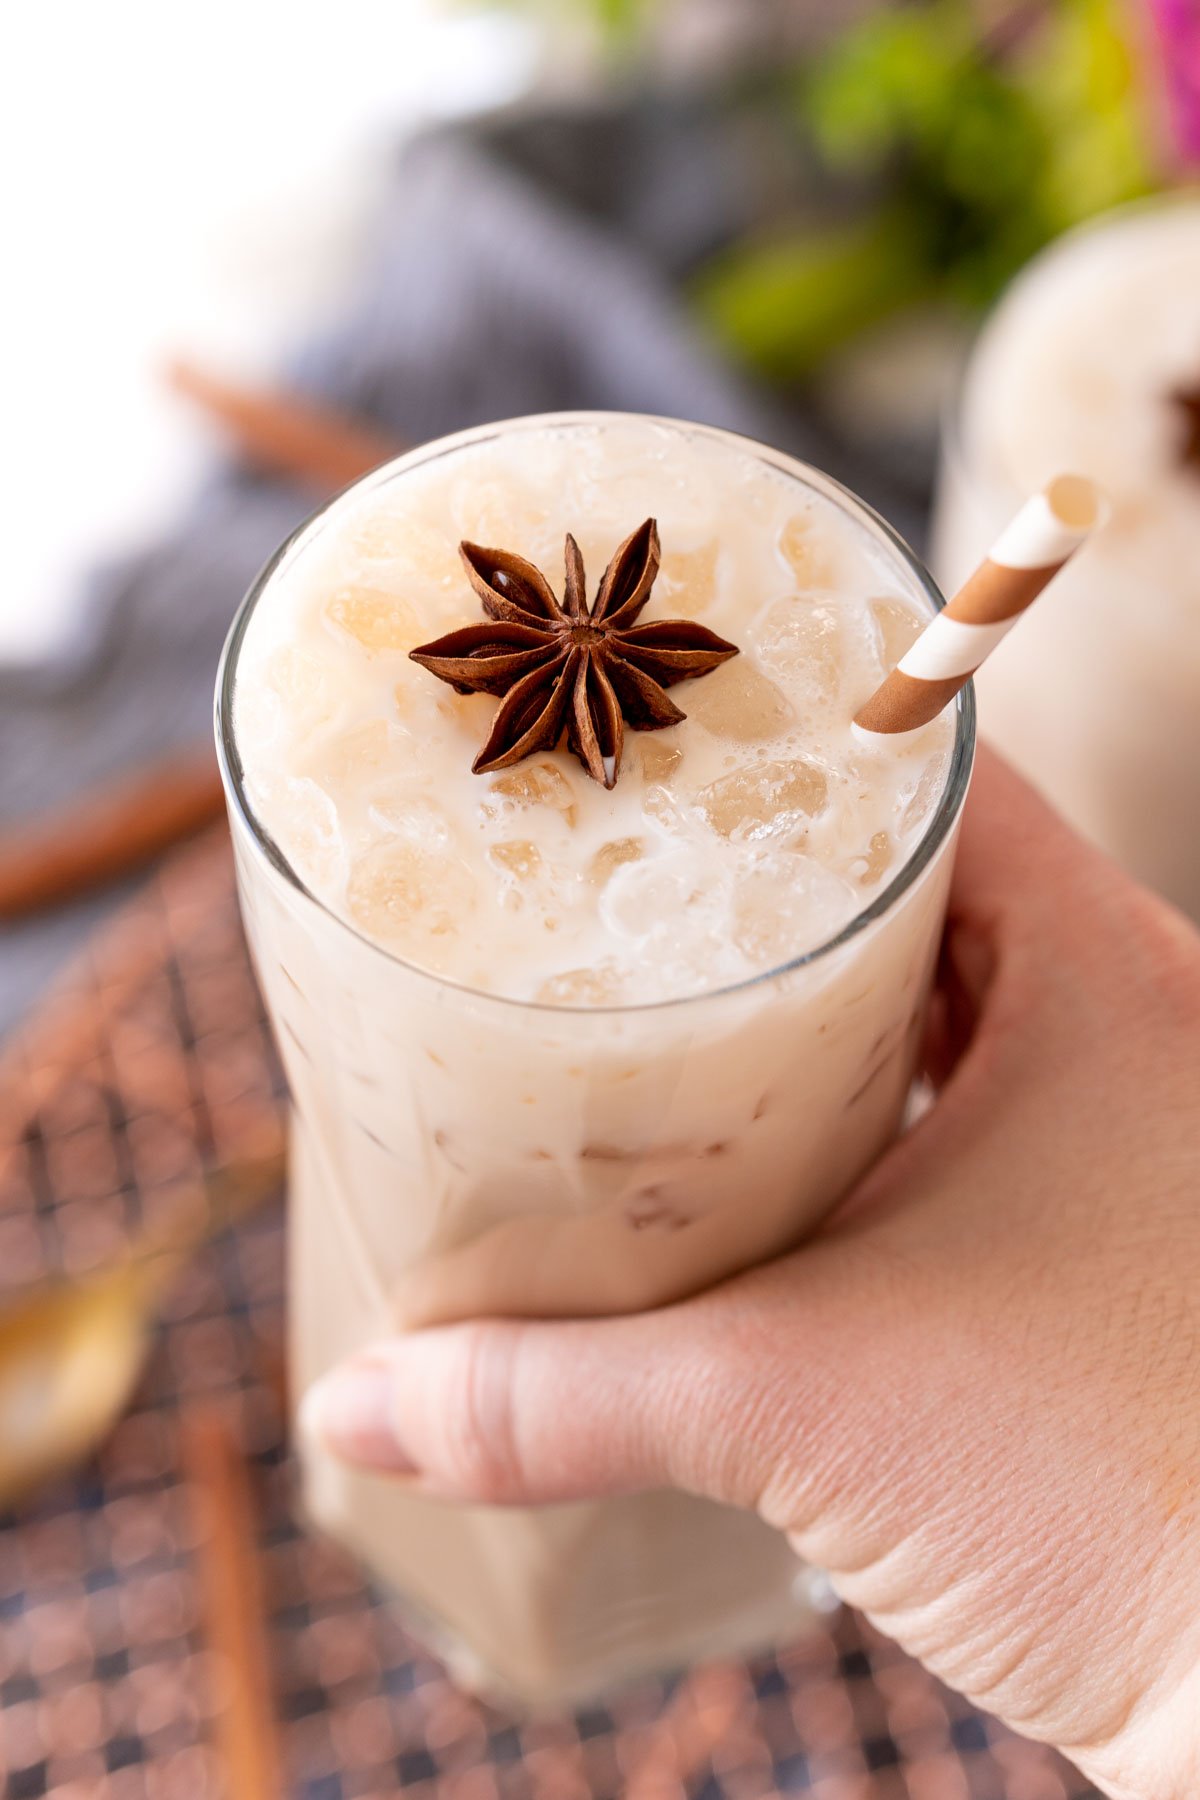 A woman's hand holding a glass with an iced chai latte to the camera.